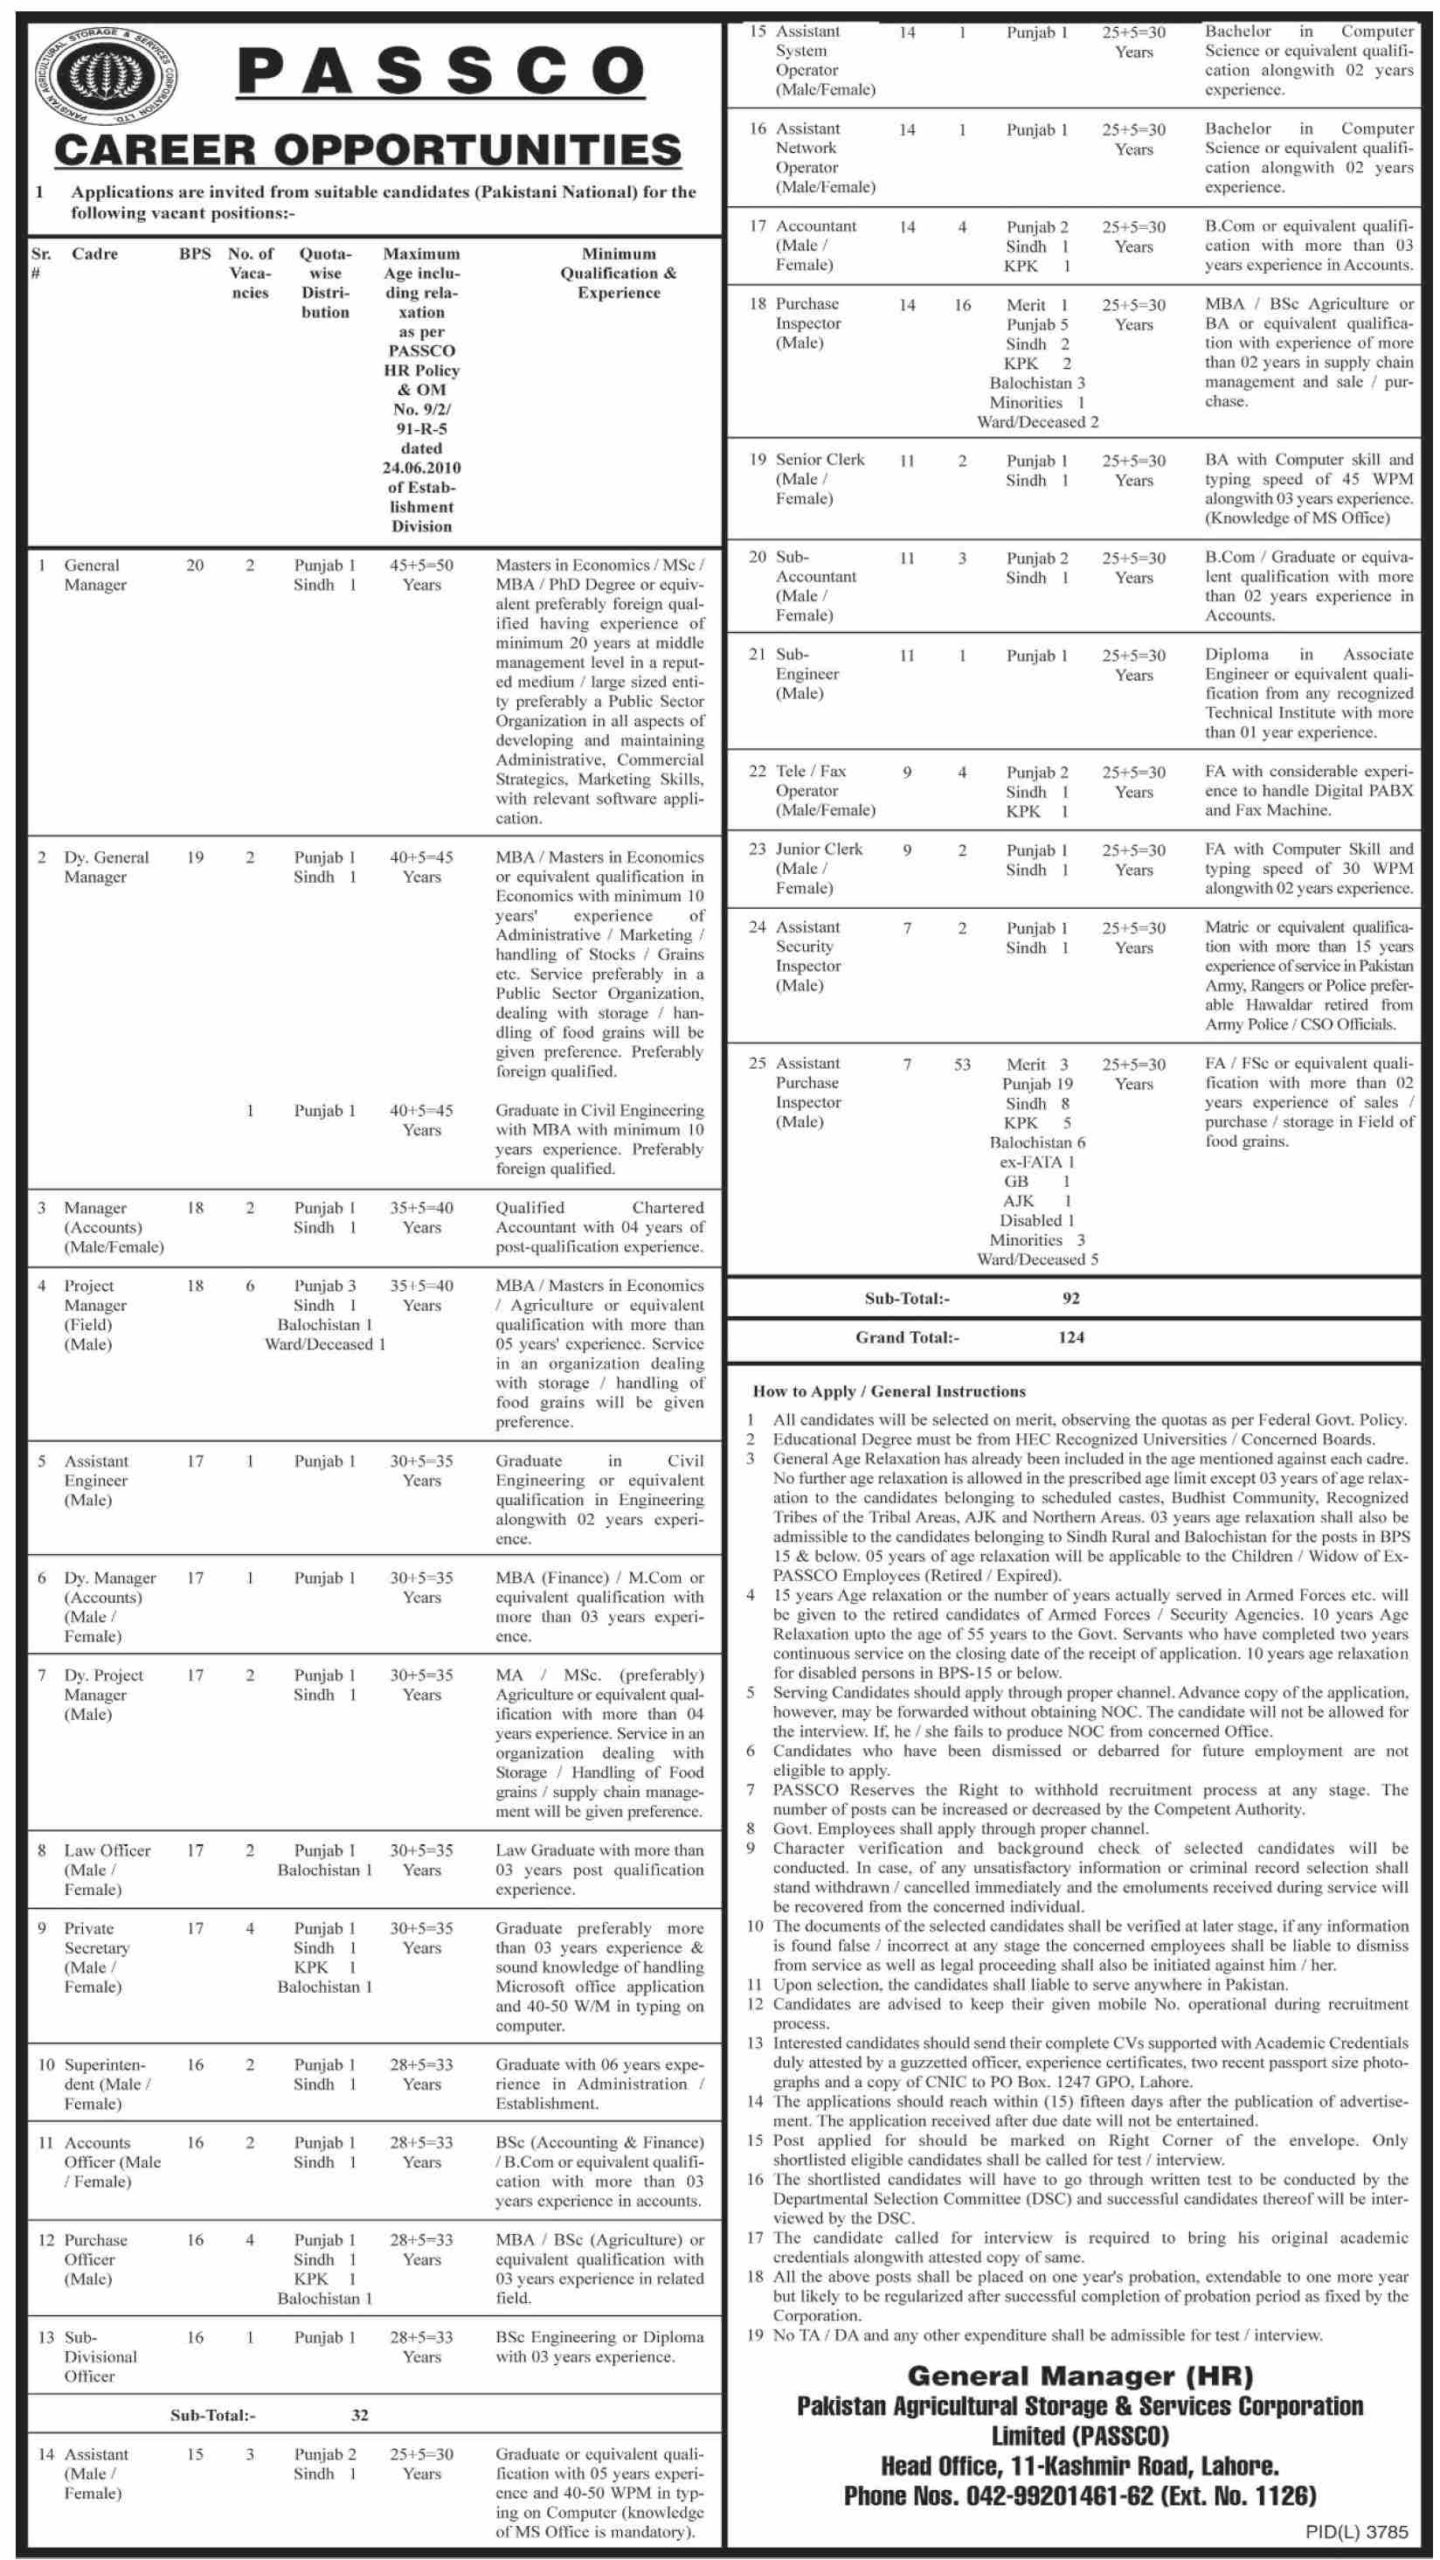 Pakistan Agriculture Storage And Services Corporation Limited PASSCO Jobs June 2020 (124 Posts)